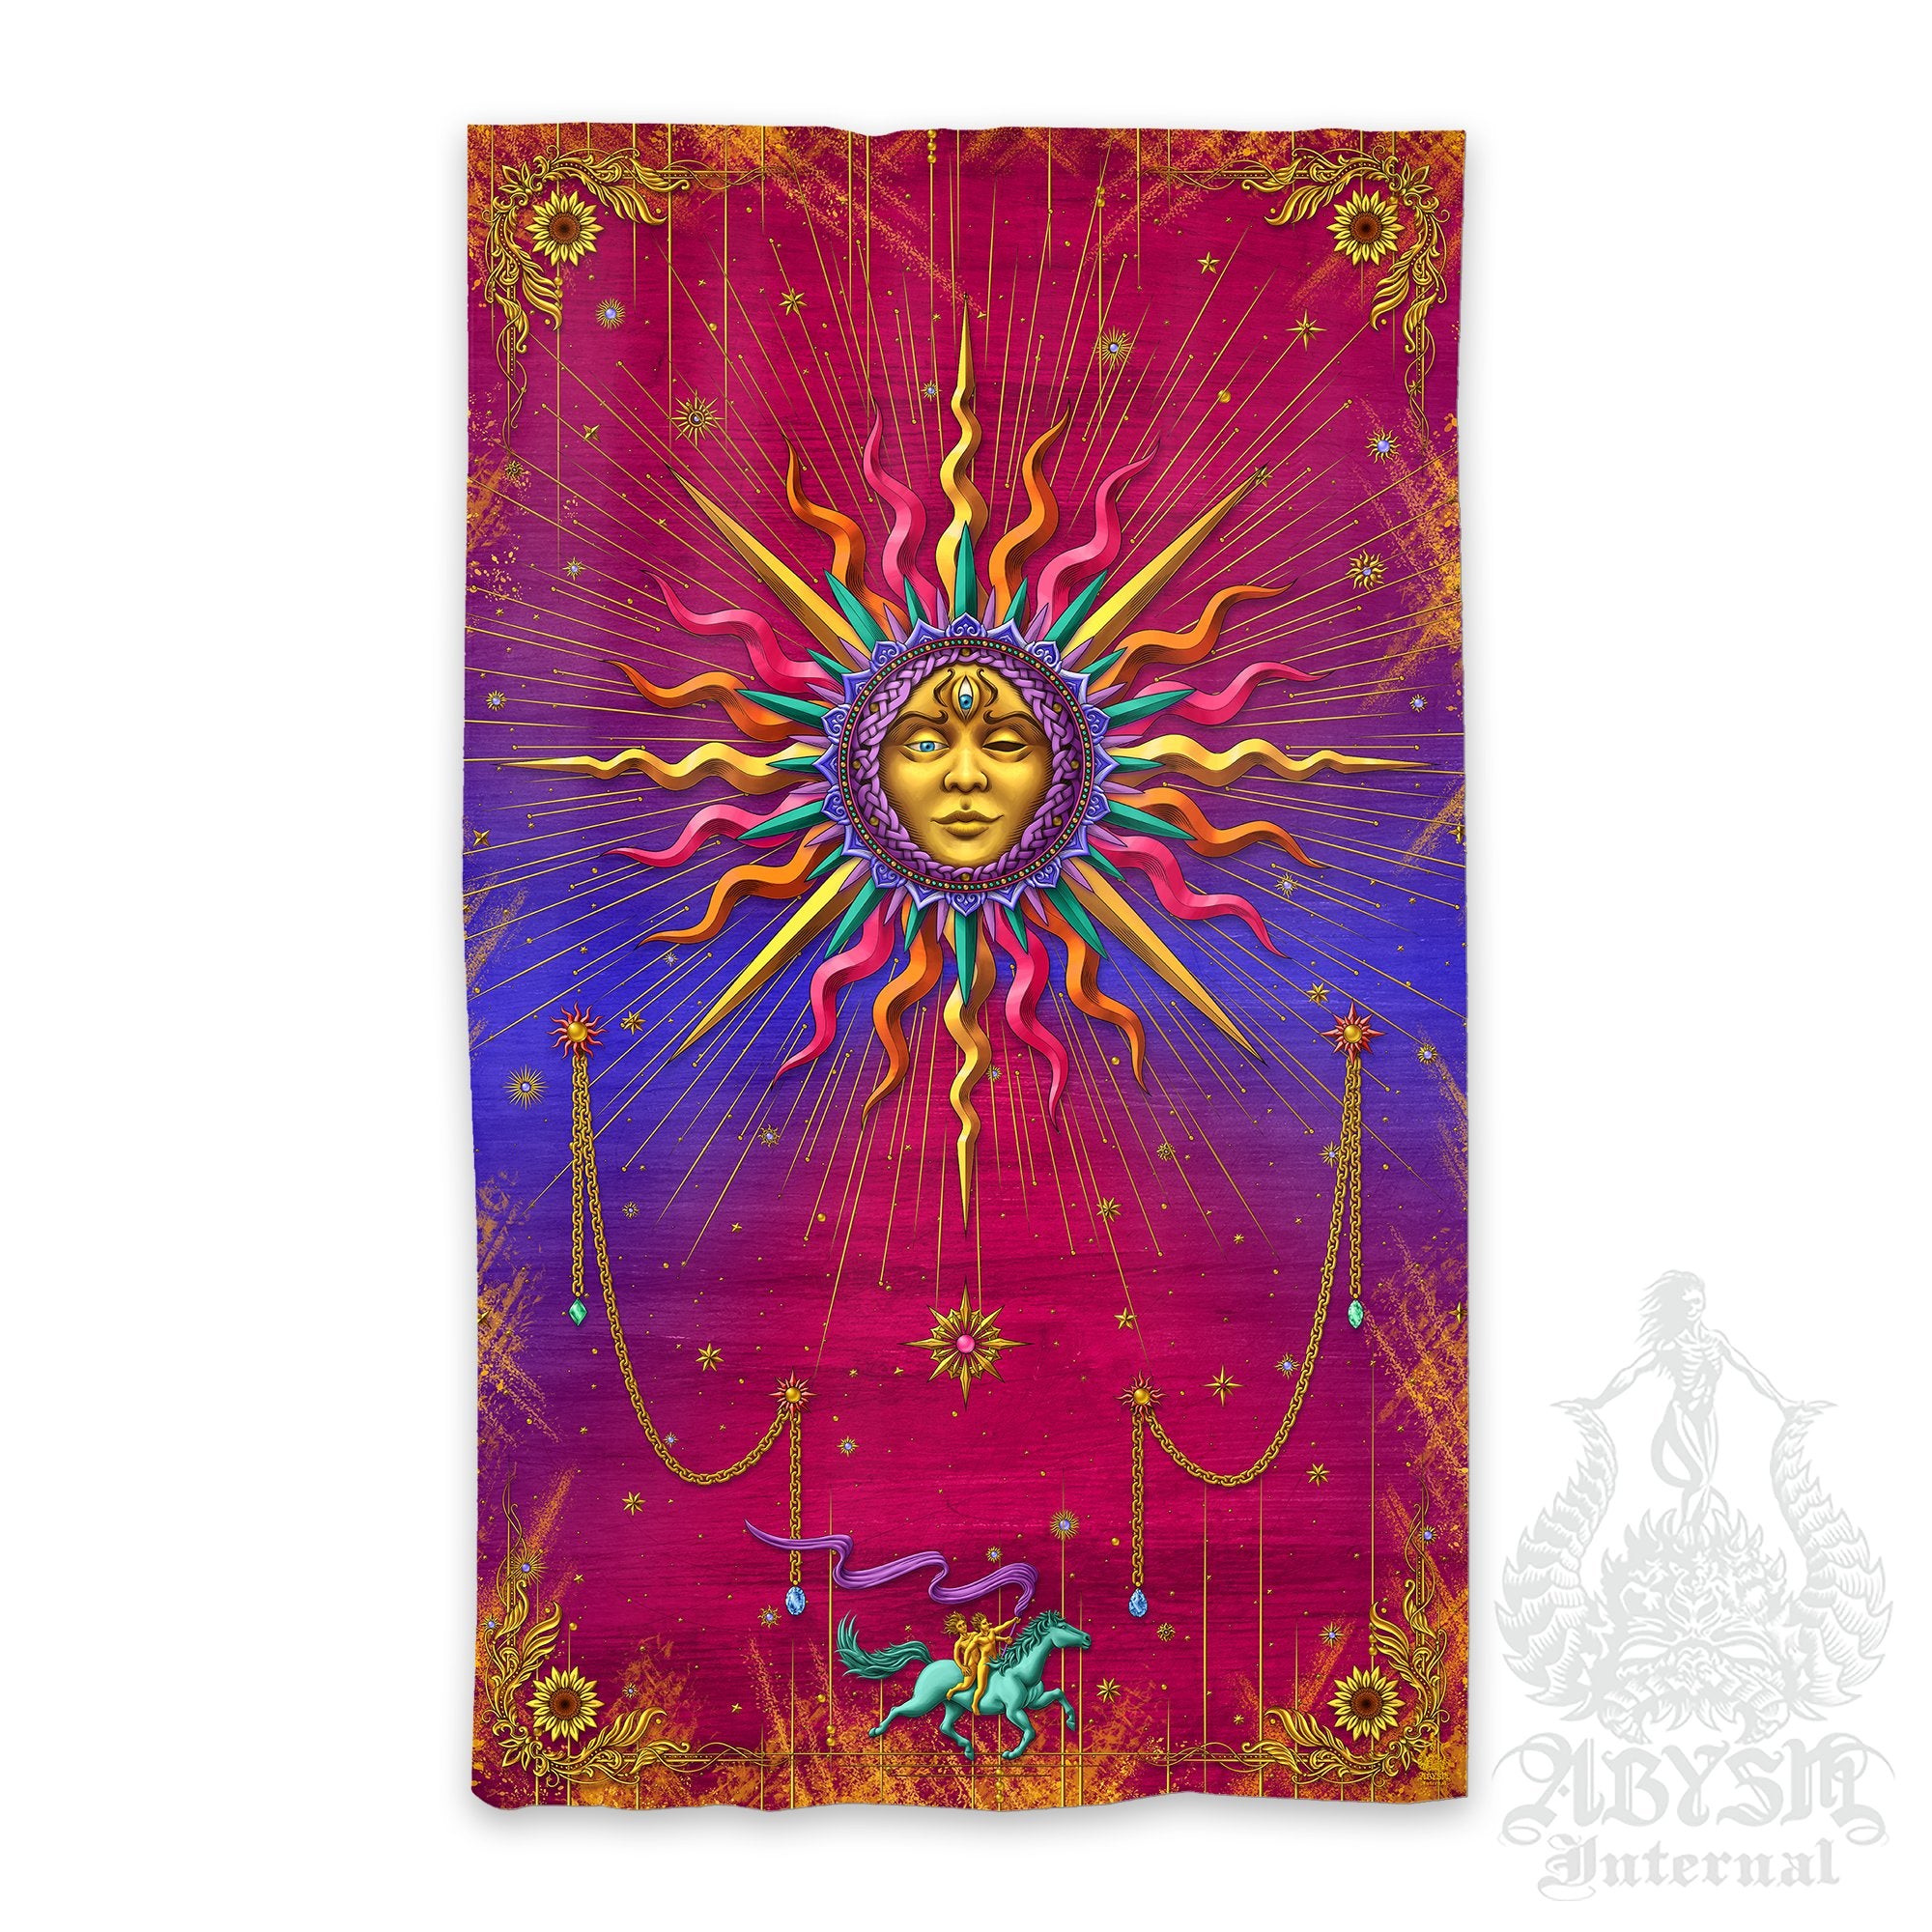 Boho Sun Curtains, 50x84' Printed Window Panels, Psychedelic Indie Home Decor, Tarot Arcana, Trippy Esoteric Art Print - Psy - Abysm Internal